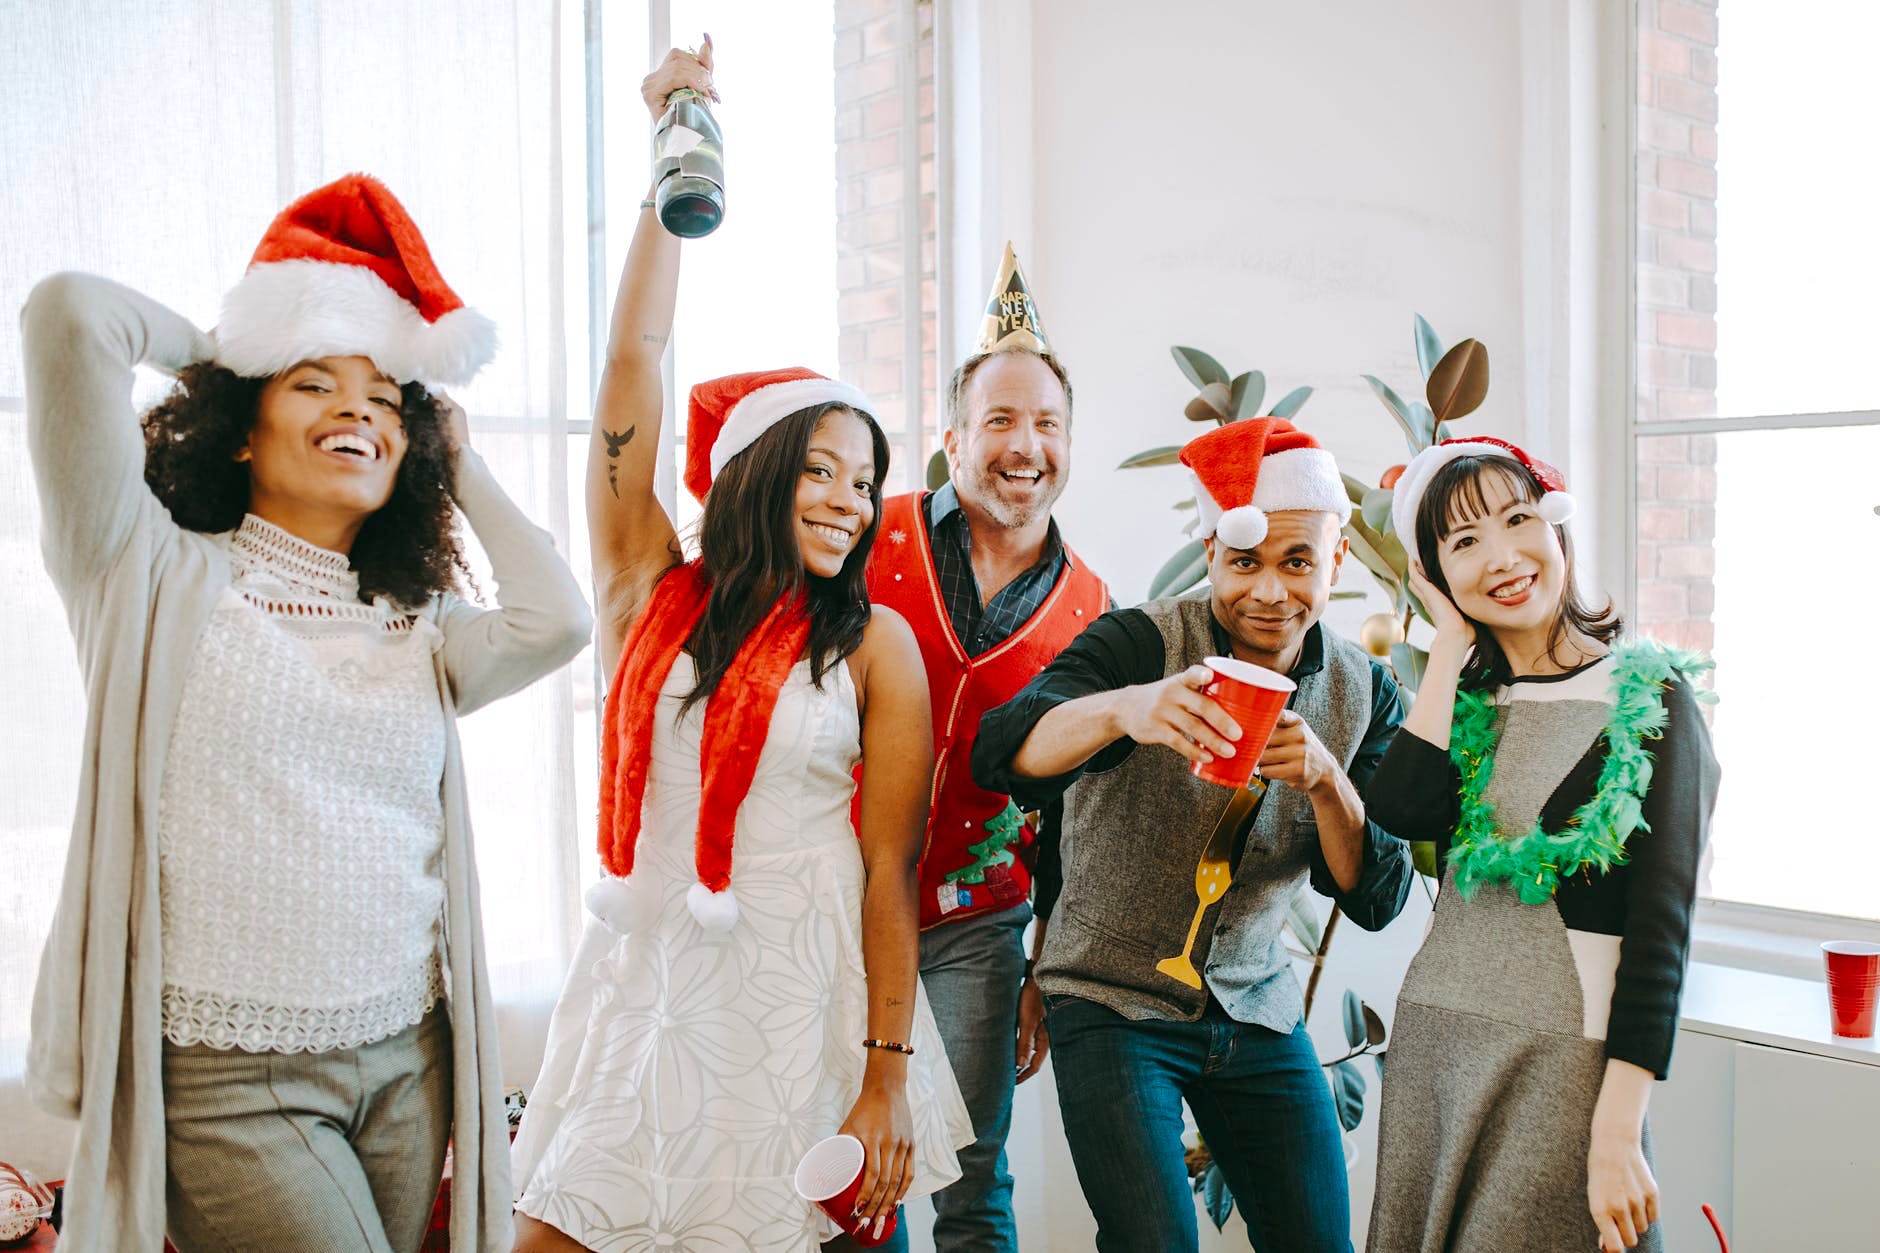 10 Tips to Host a Holiday Party, According to Event Planners